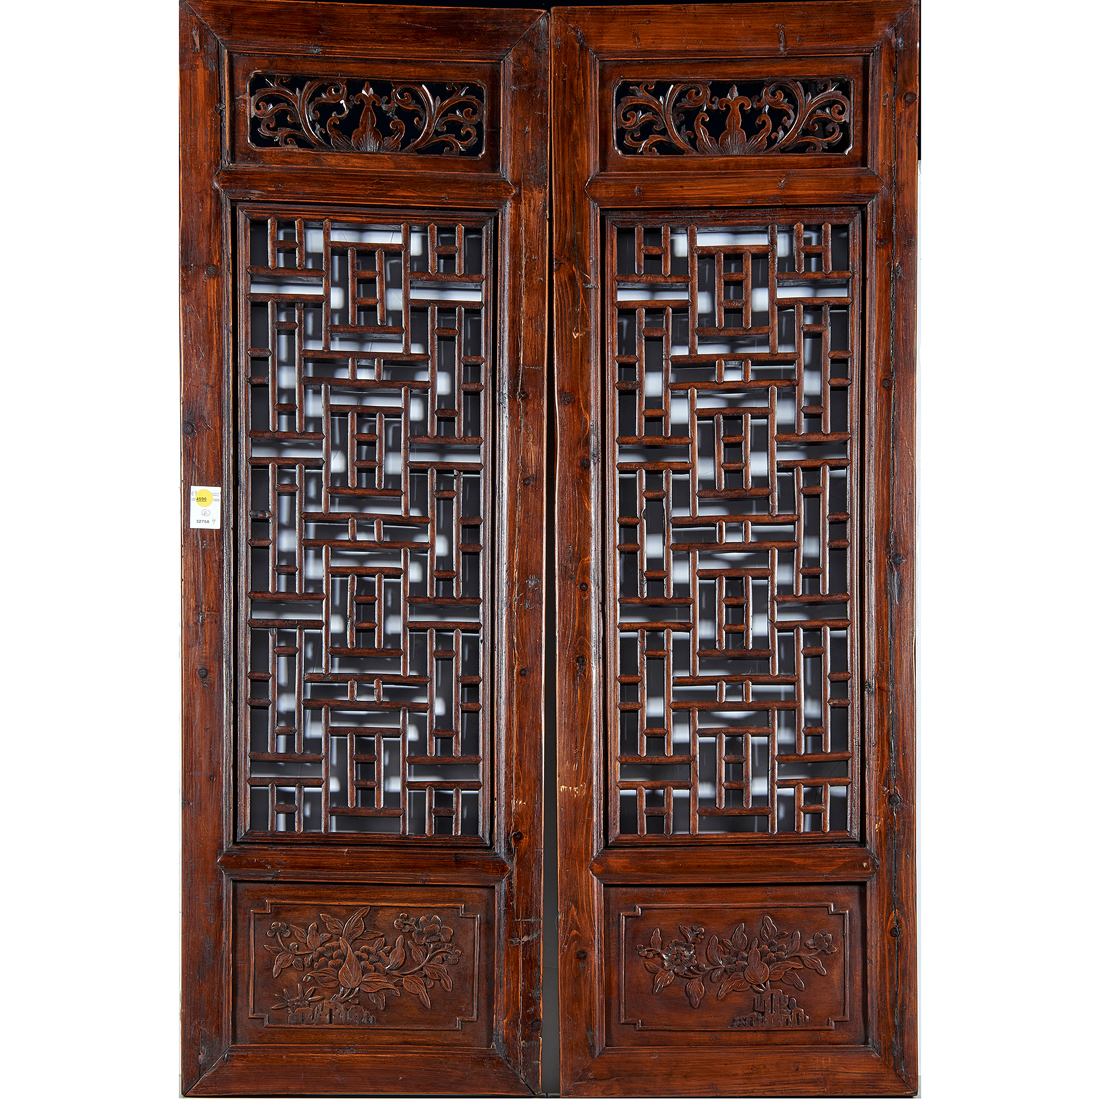 PAIR OF CHINESE CARVED WOOD WINDOW